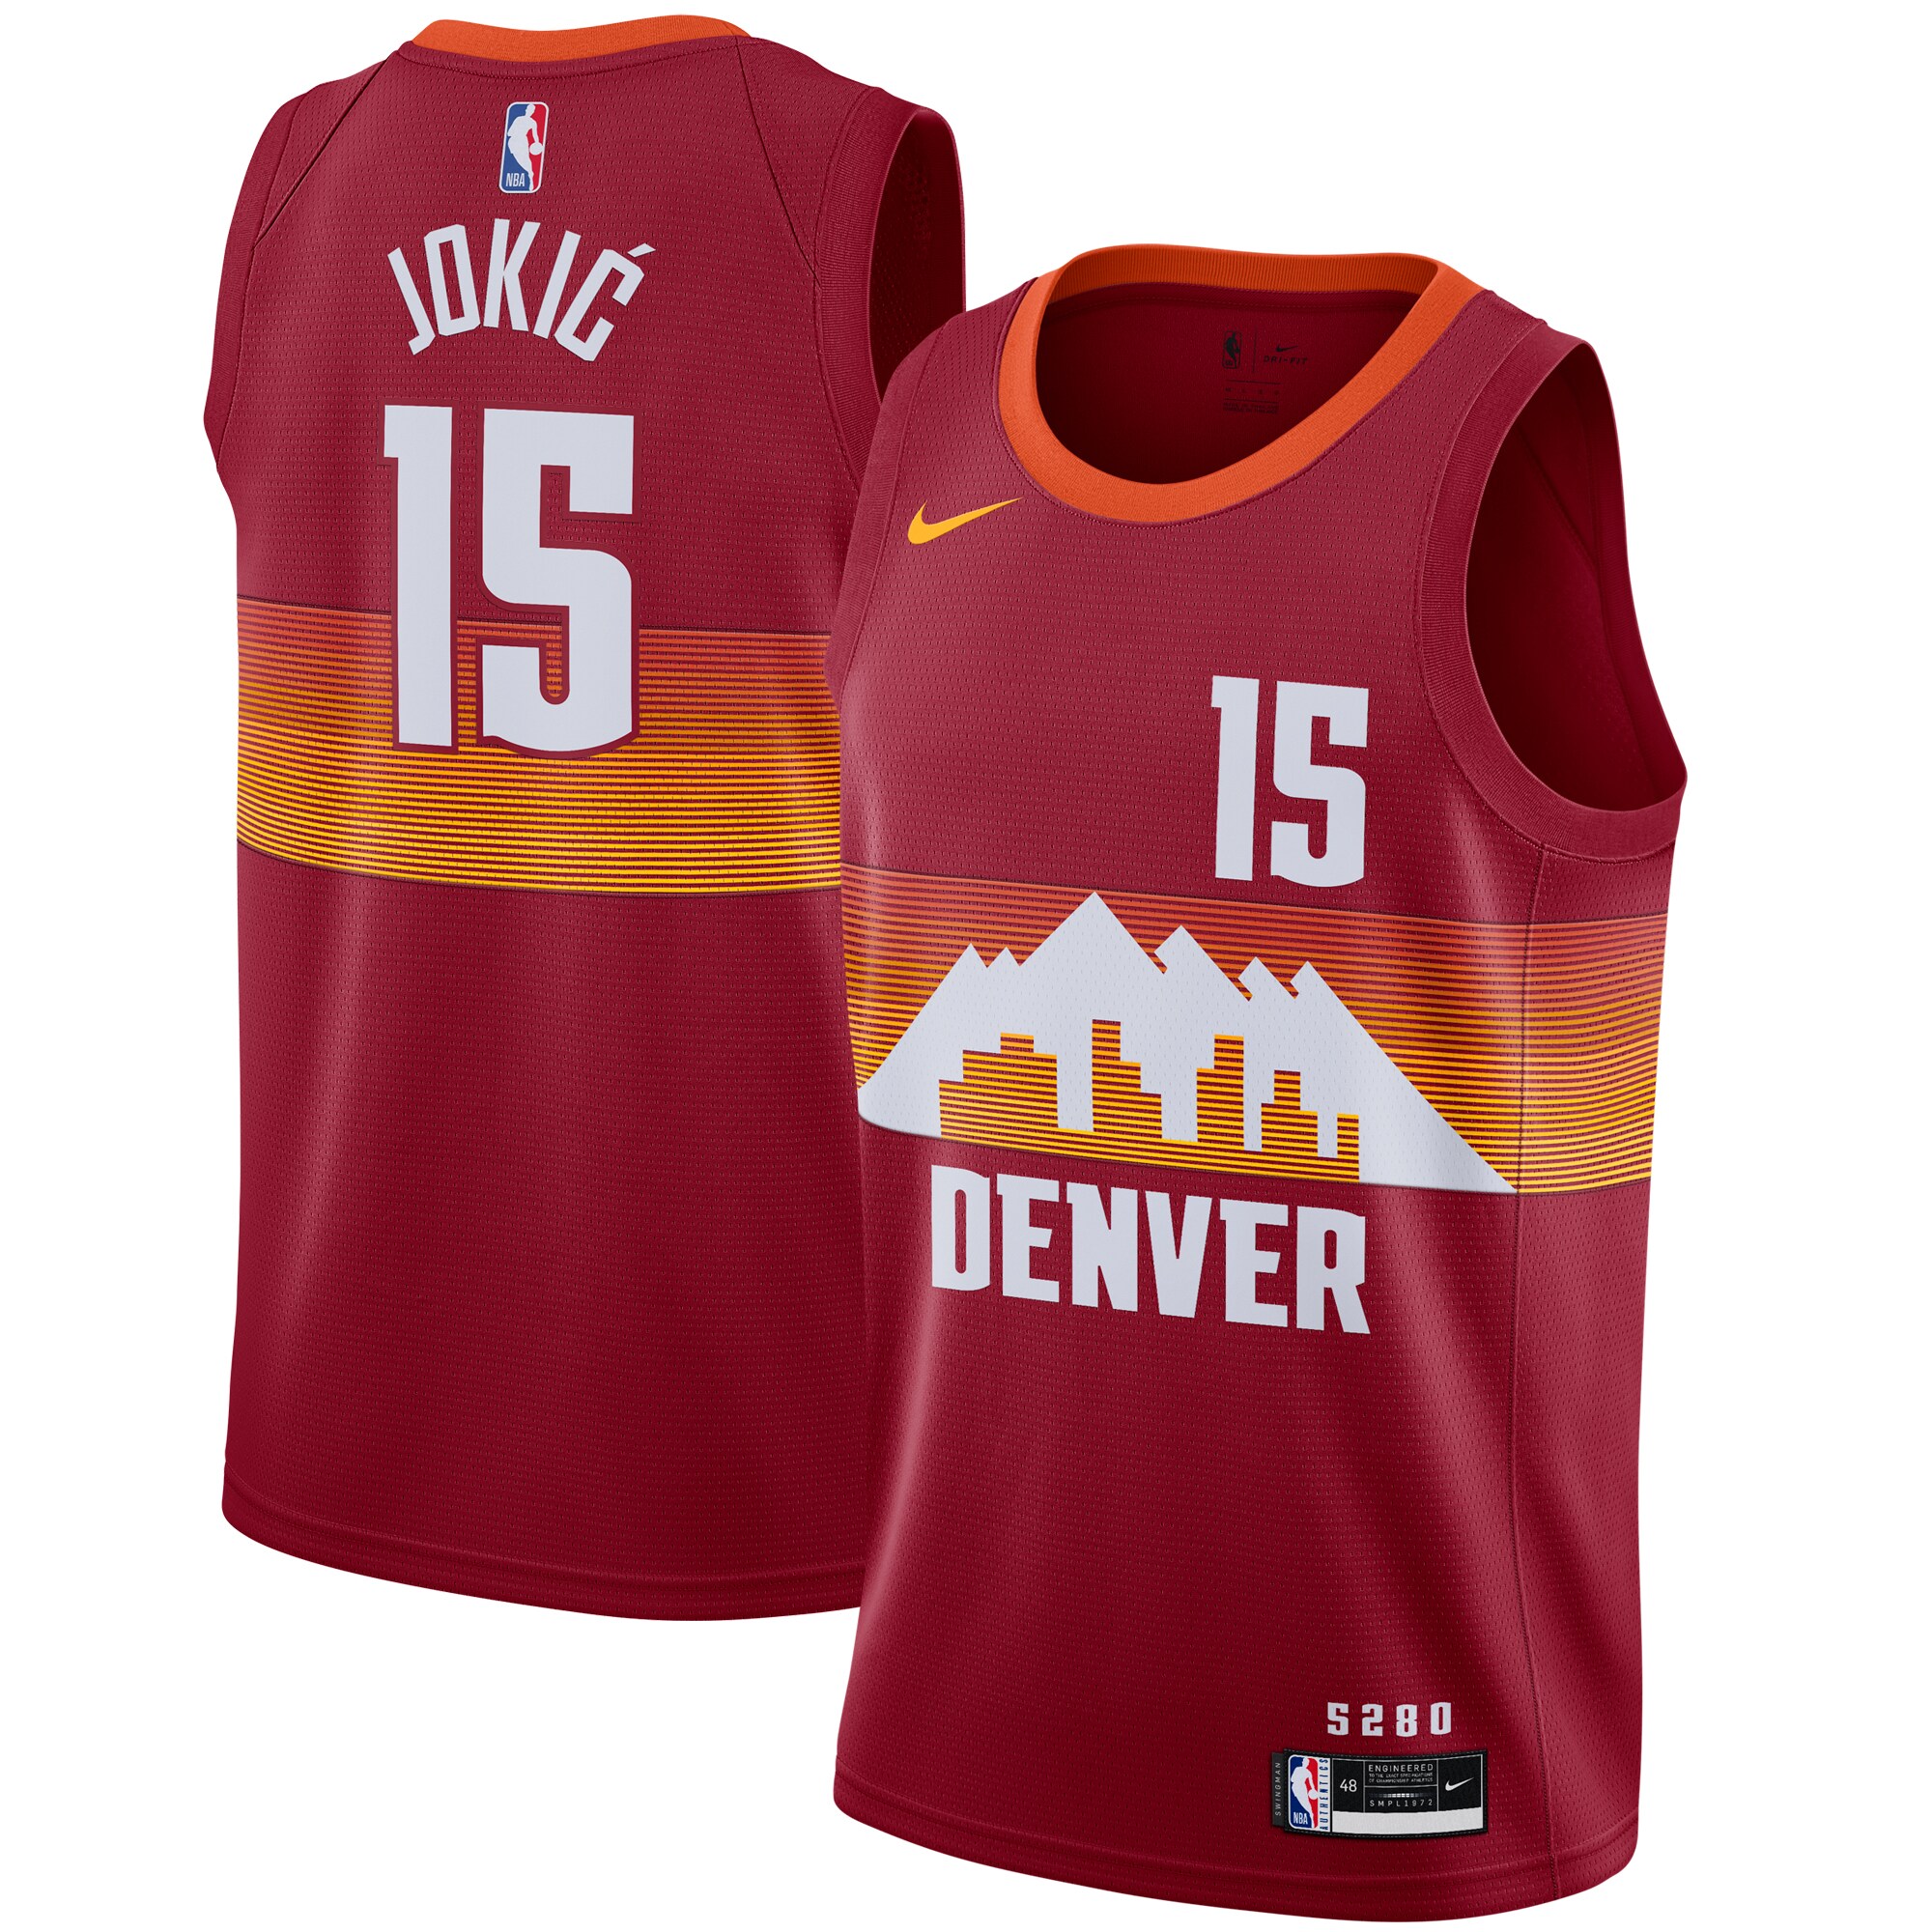 Denver Nuggets to debut Flatirons Red City Edition jersey against Los  Angeles Clippers on Christmas